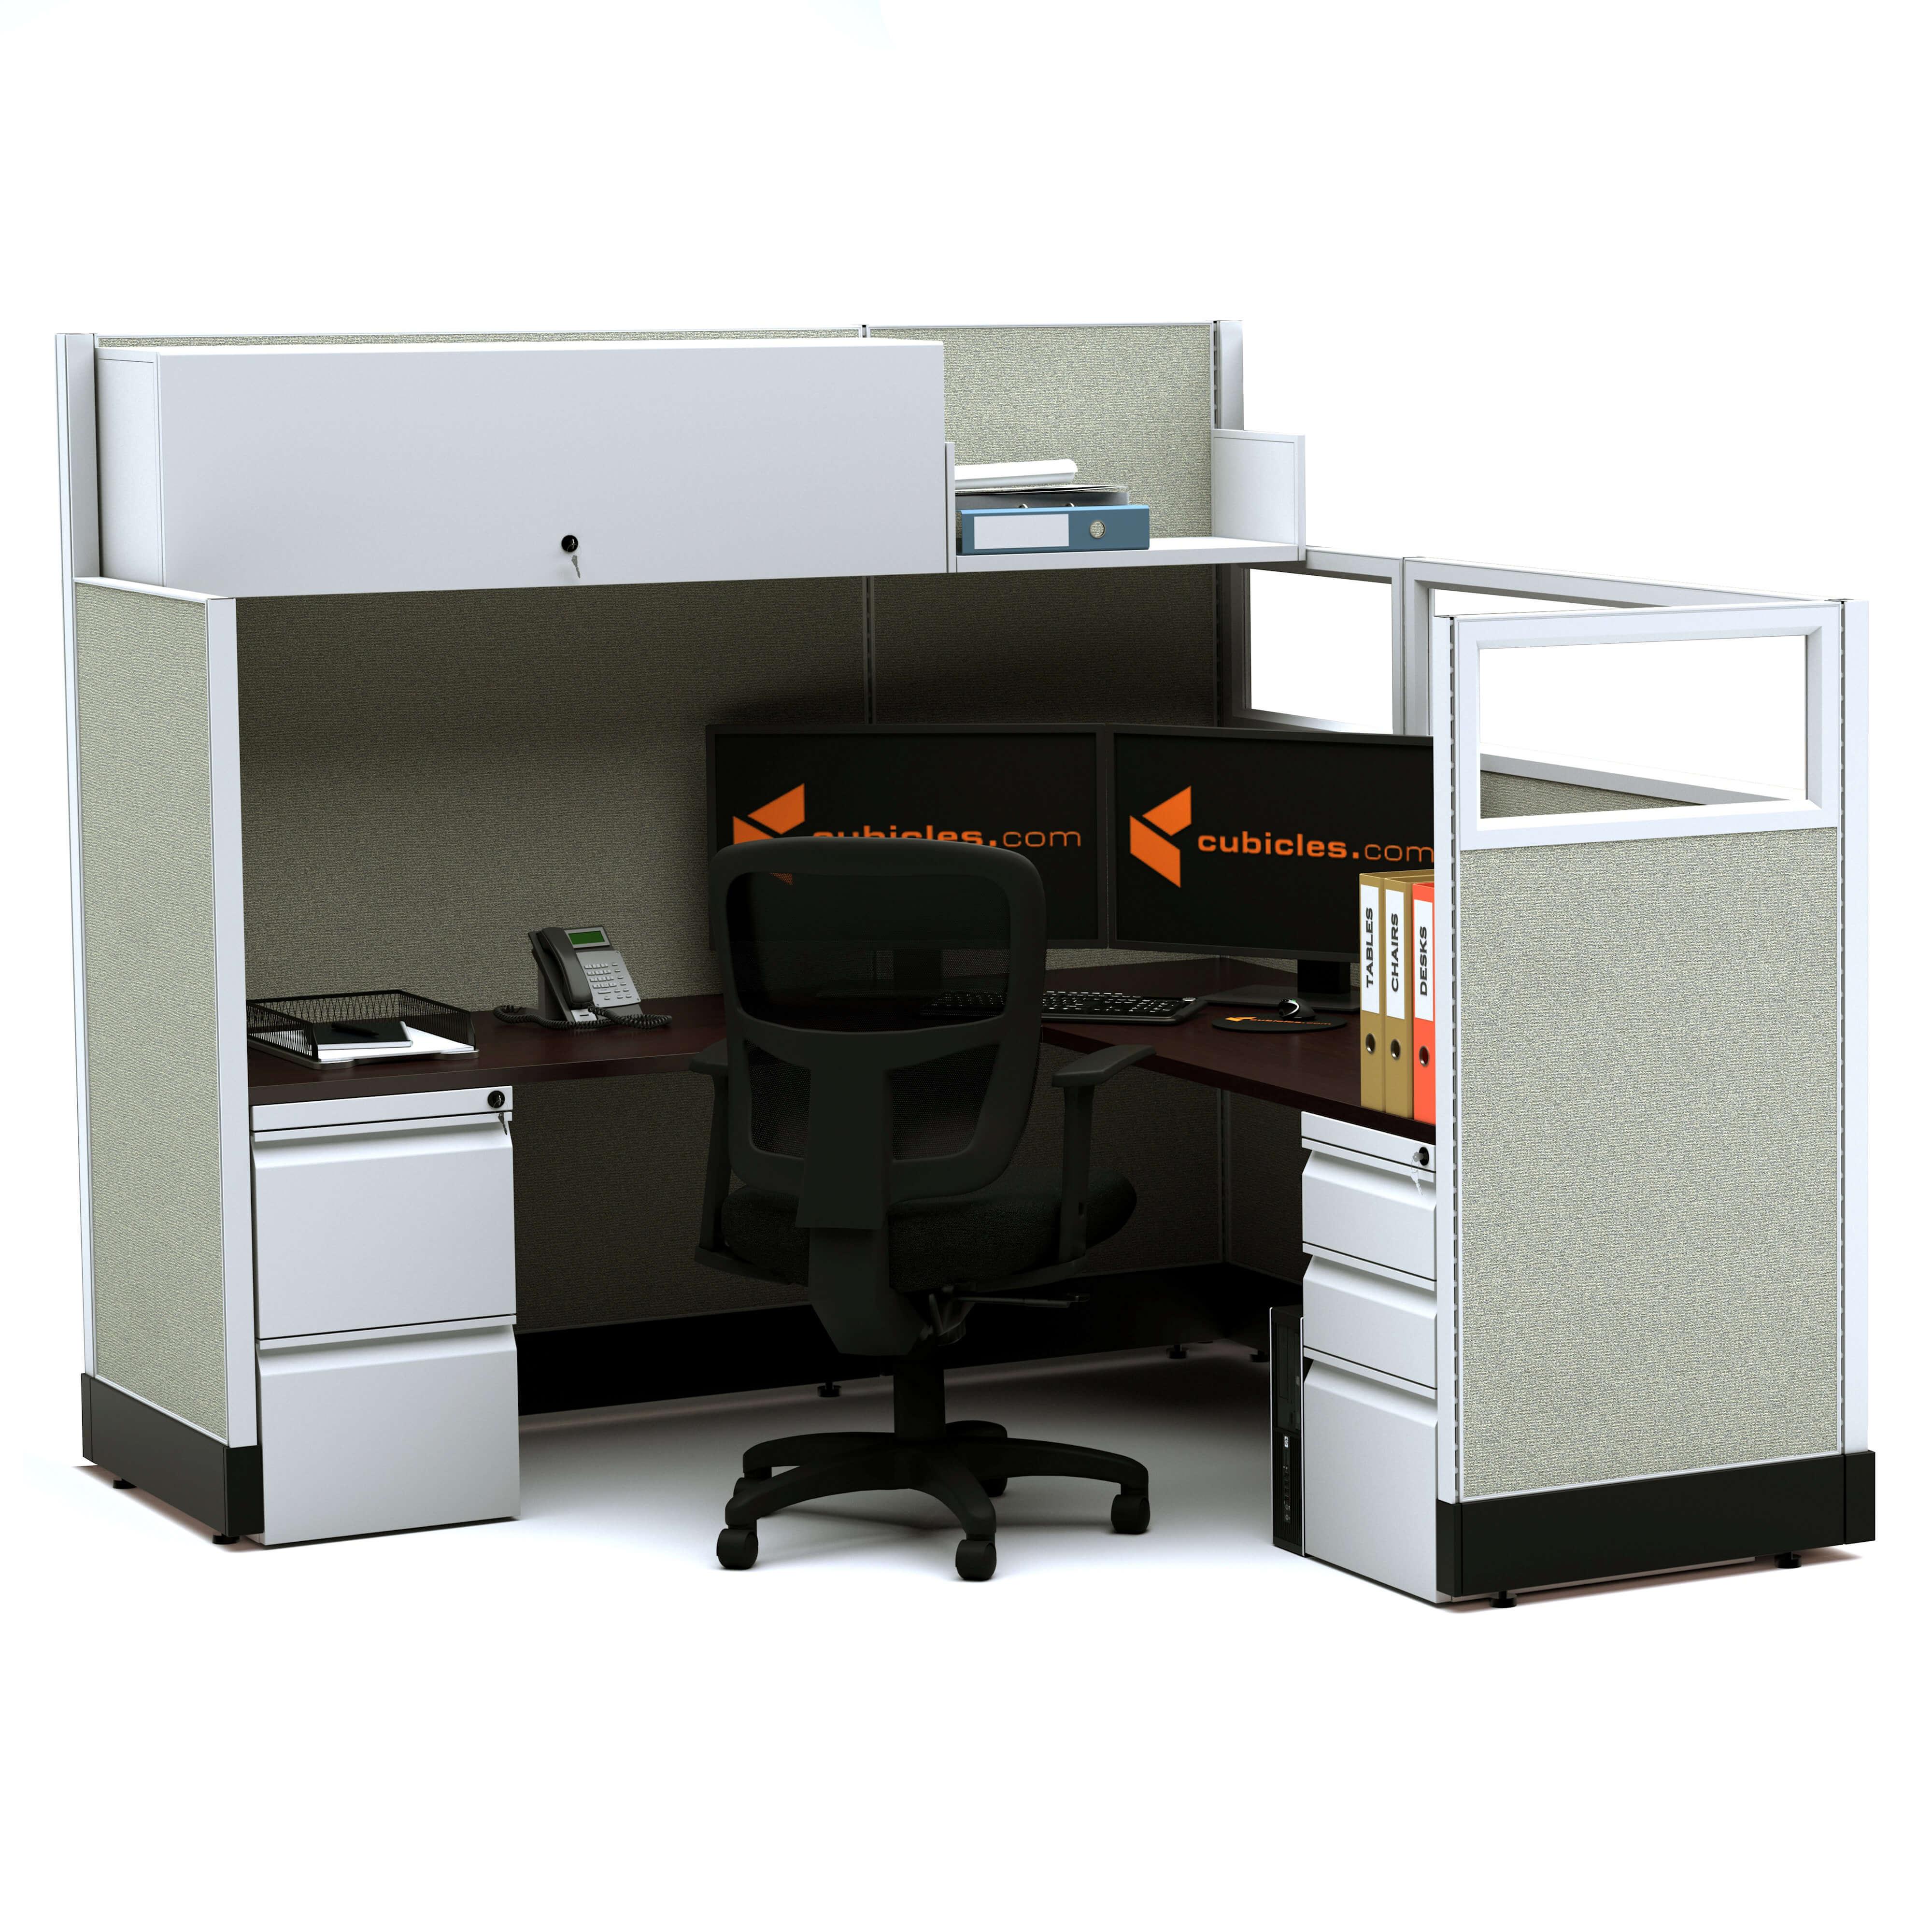 Modular office furniture partial glass office cubicles 53 67h single non powered